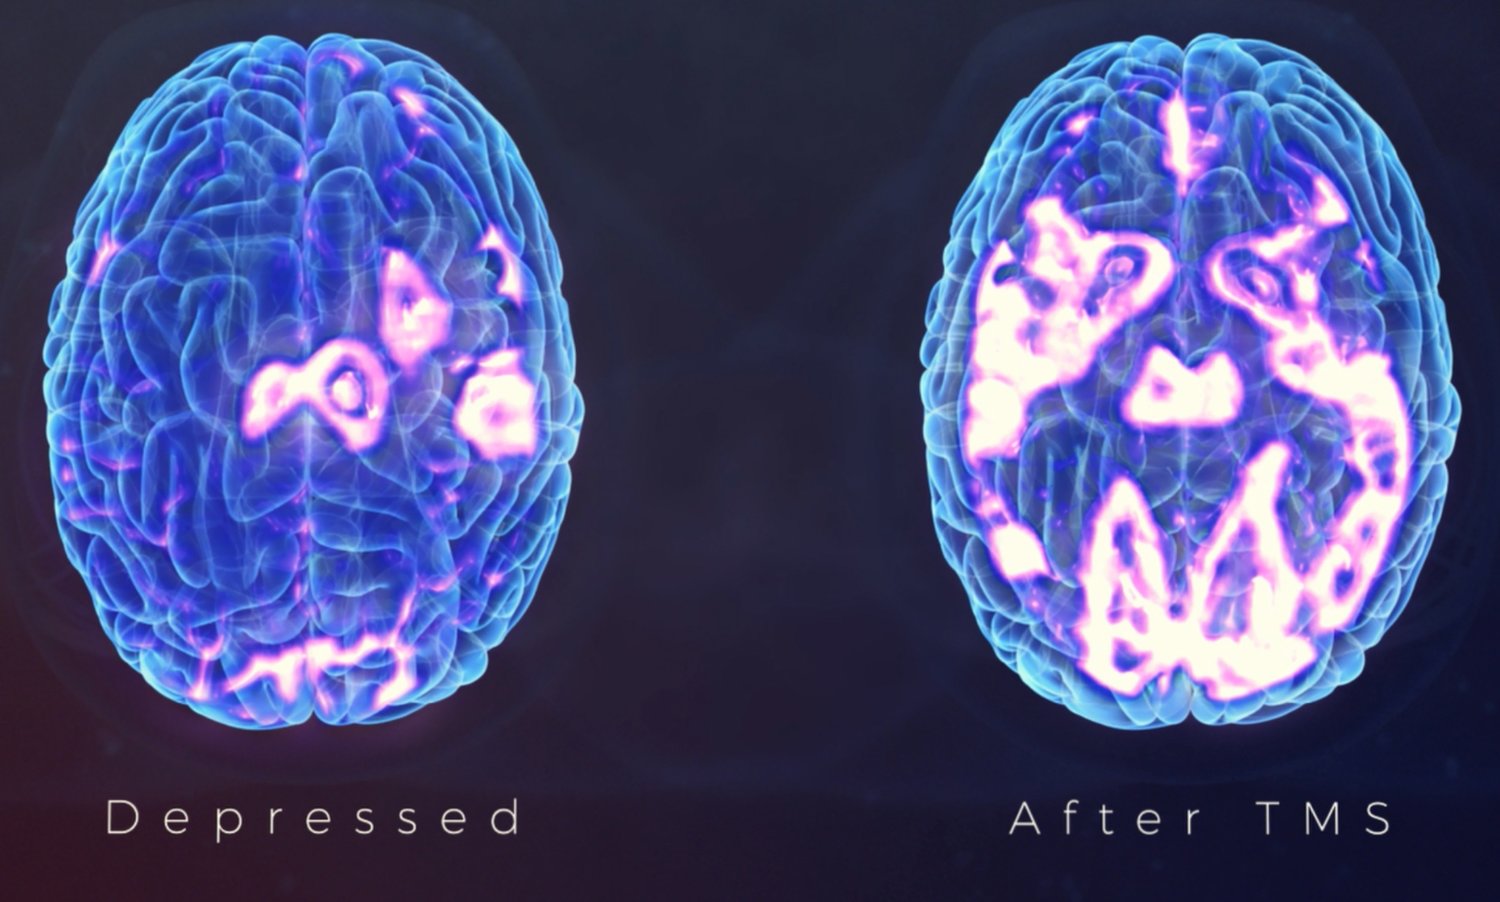 Effect of TMS